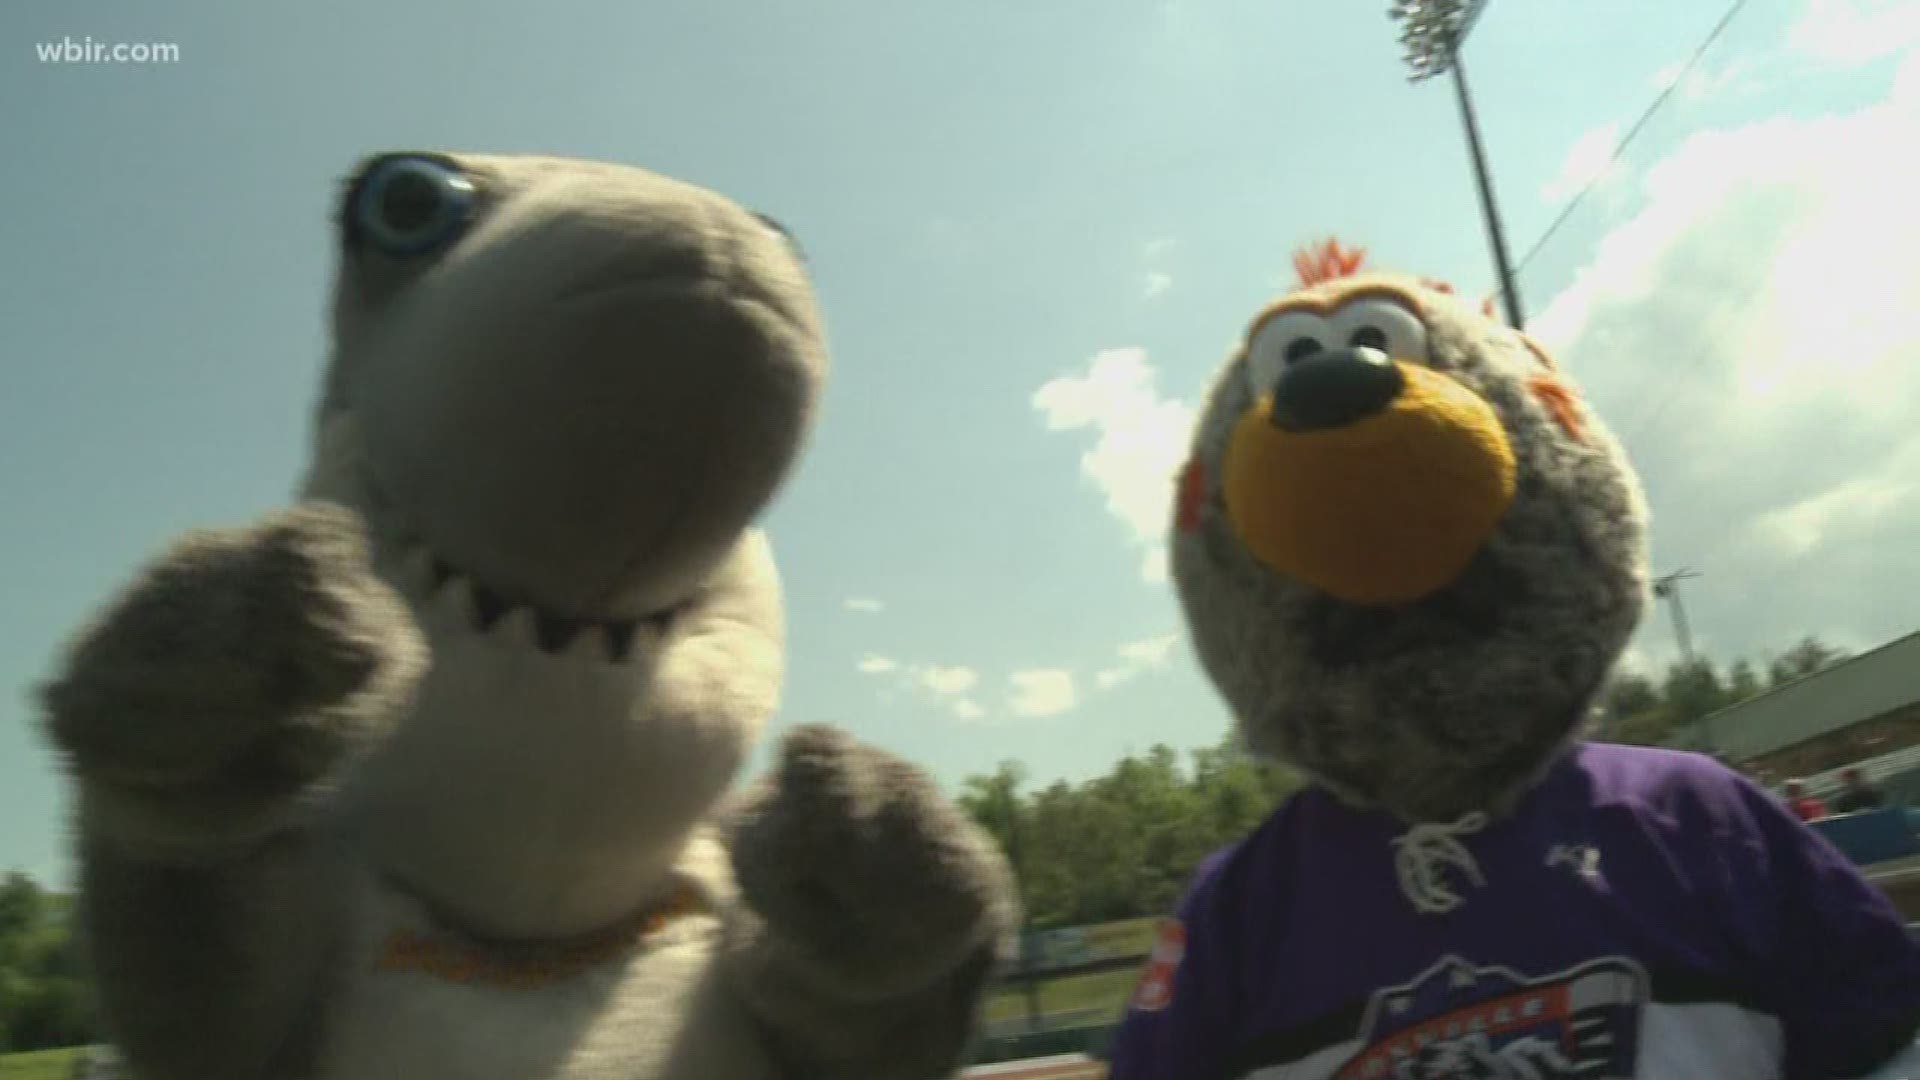 It's time for game one in our annual Mascot Baseball Game at Smokies Stadium in Kodak. We have new teams, new players but the same old fun.May 21, 2018-4pm